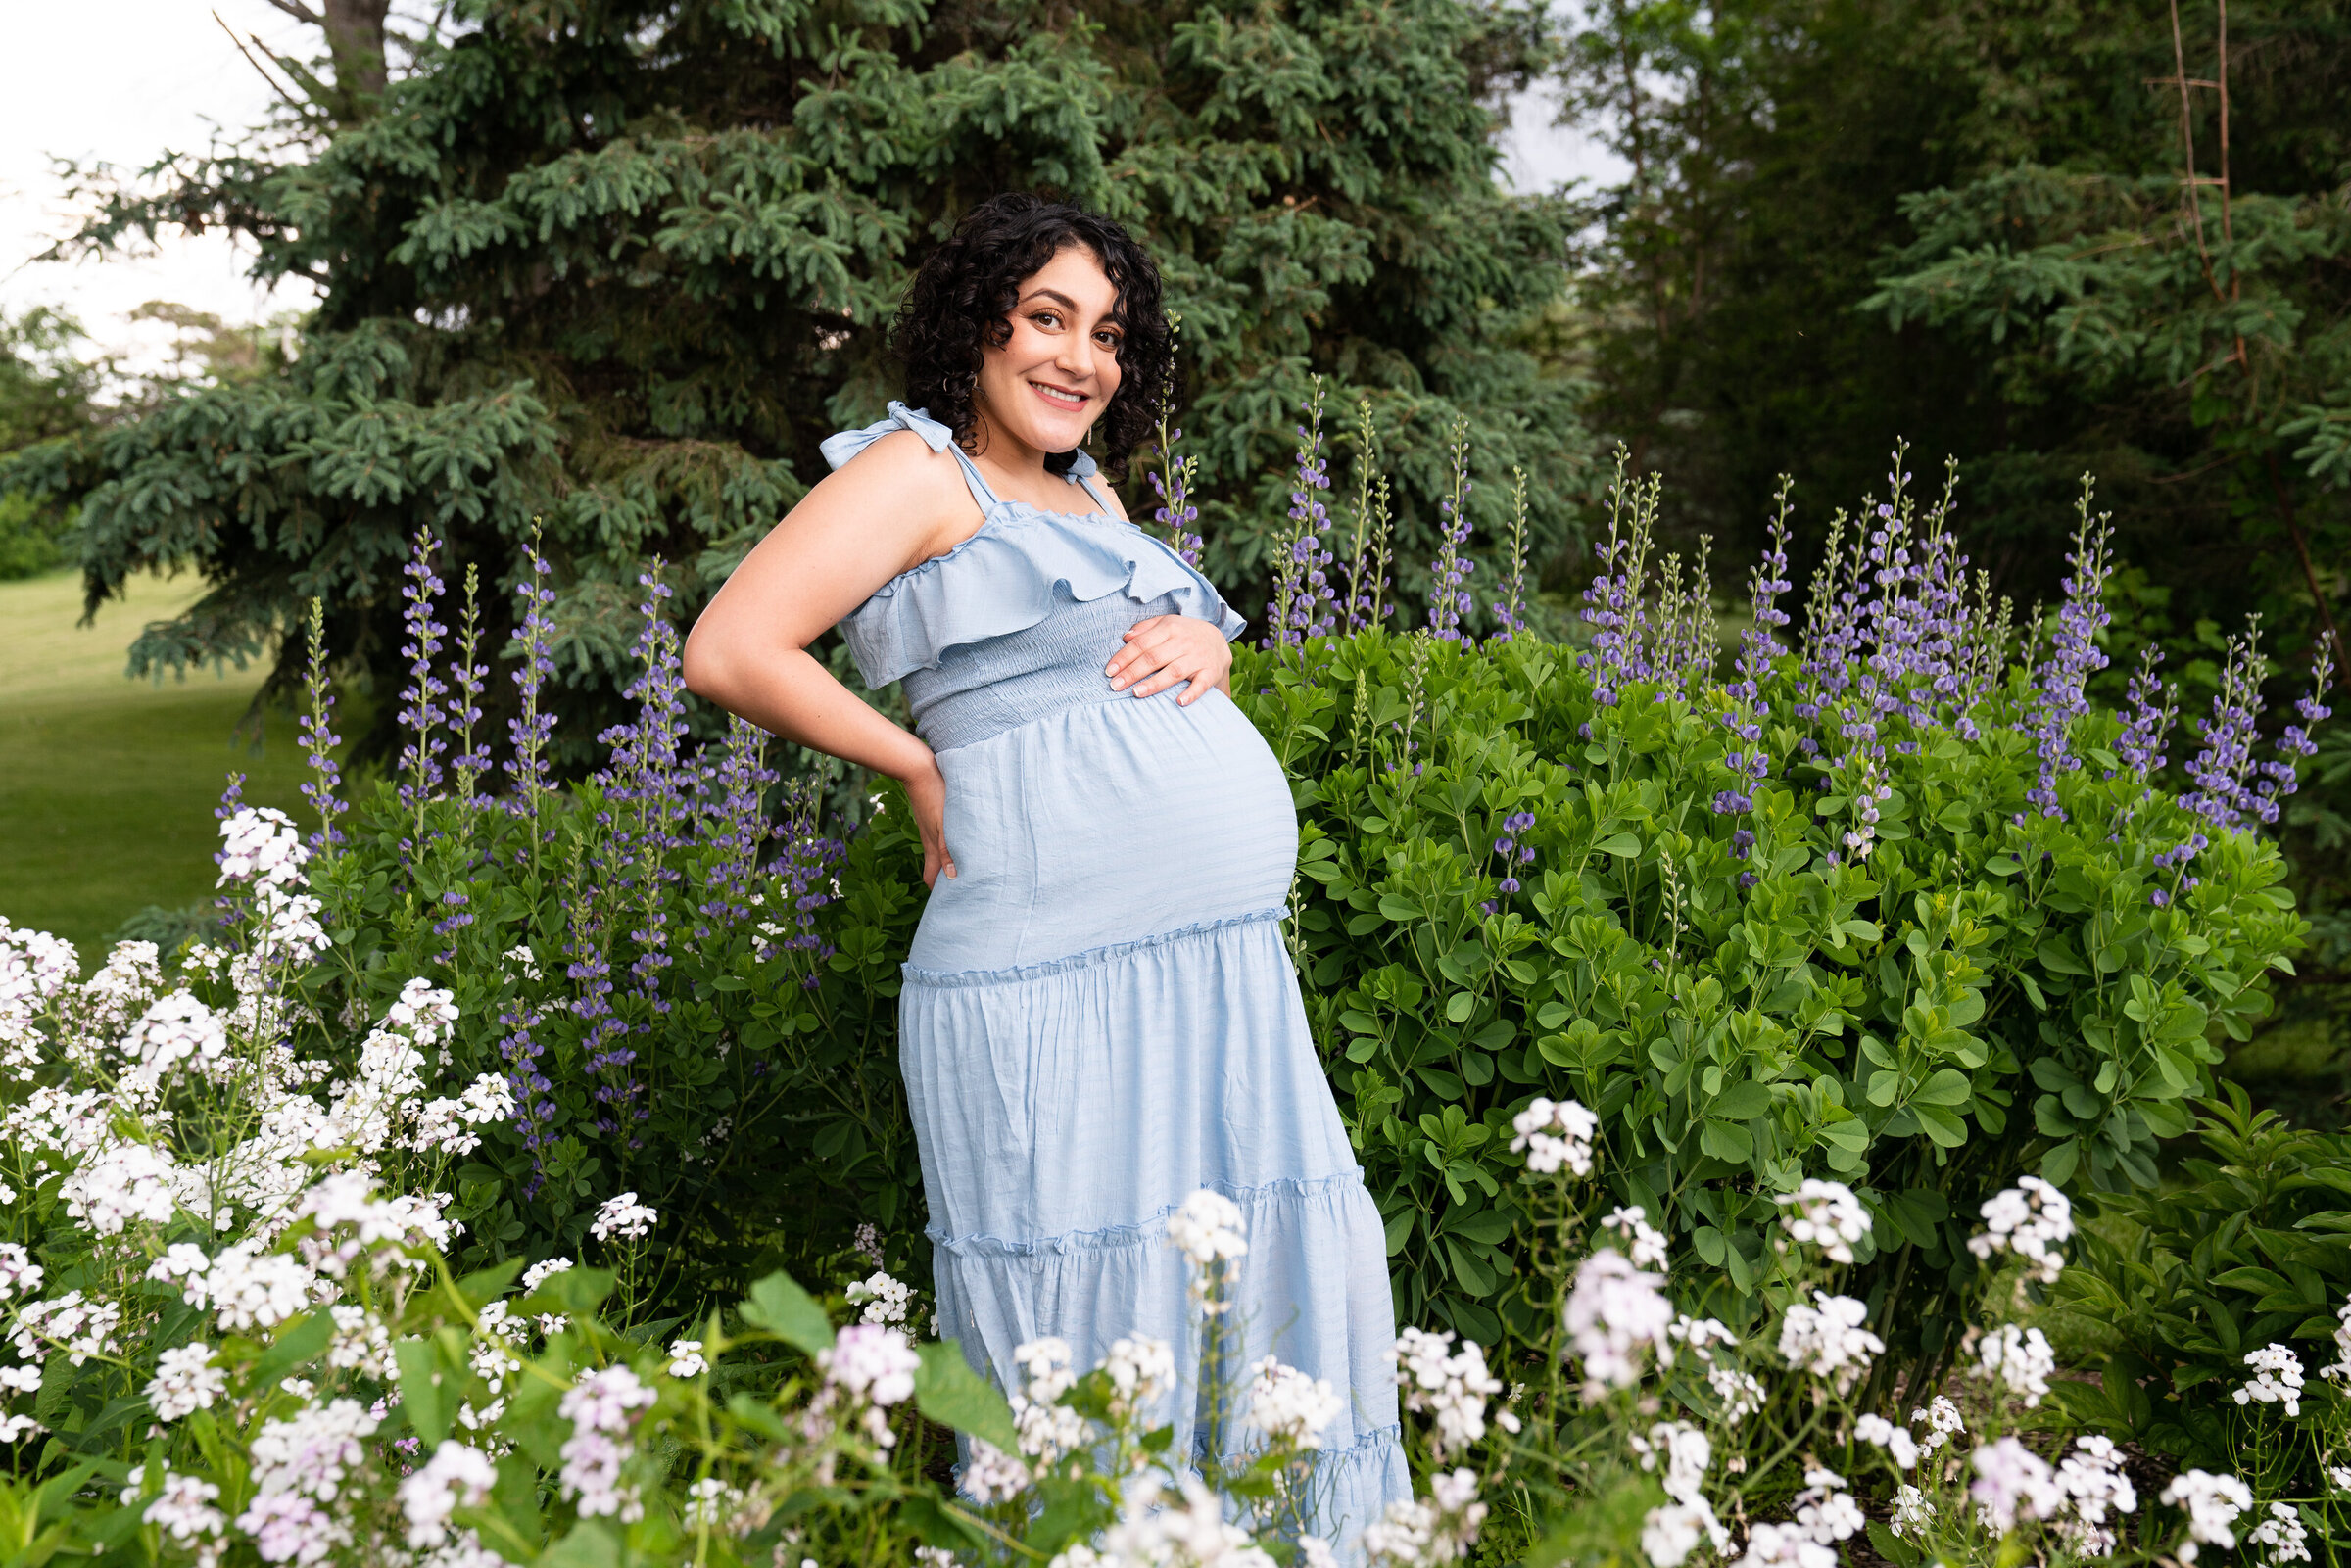 Woman posed in the flowers holding her baby bump